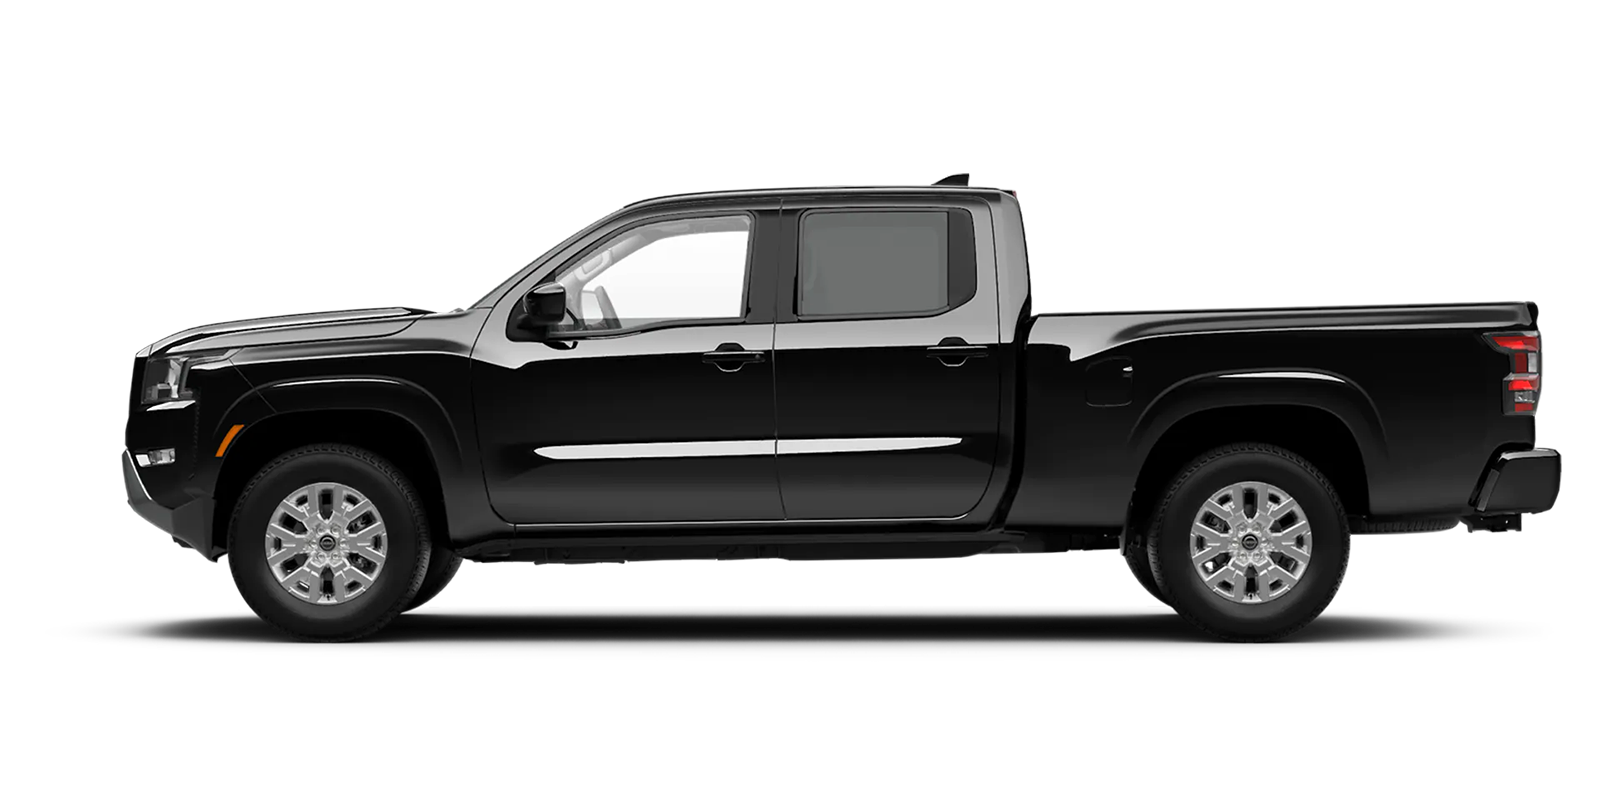 2022 Frontier Crew Cab Long Bed SV 4x2 in Super Black | Greenway Nissan of Florence in Florence AL